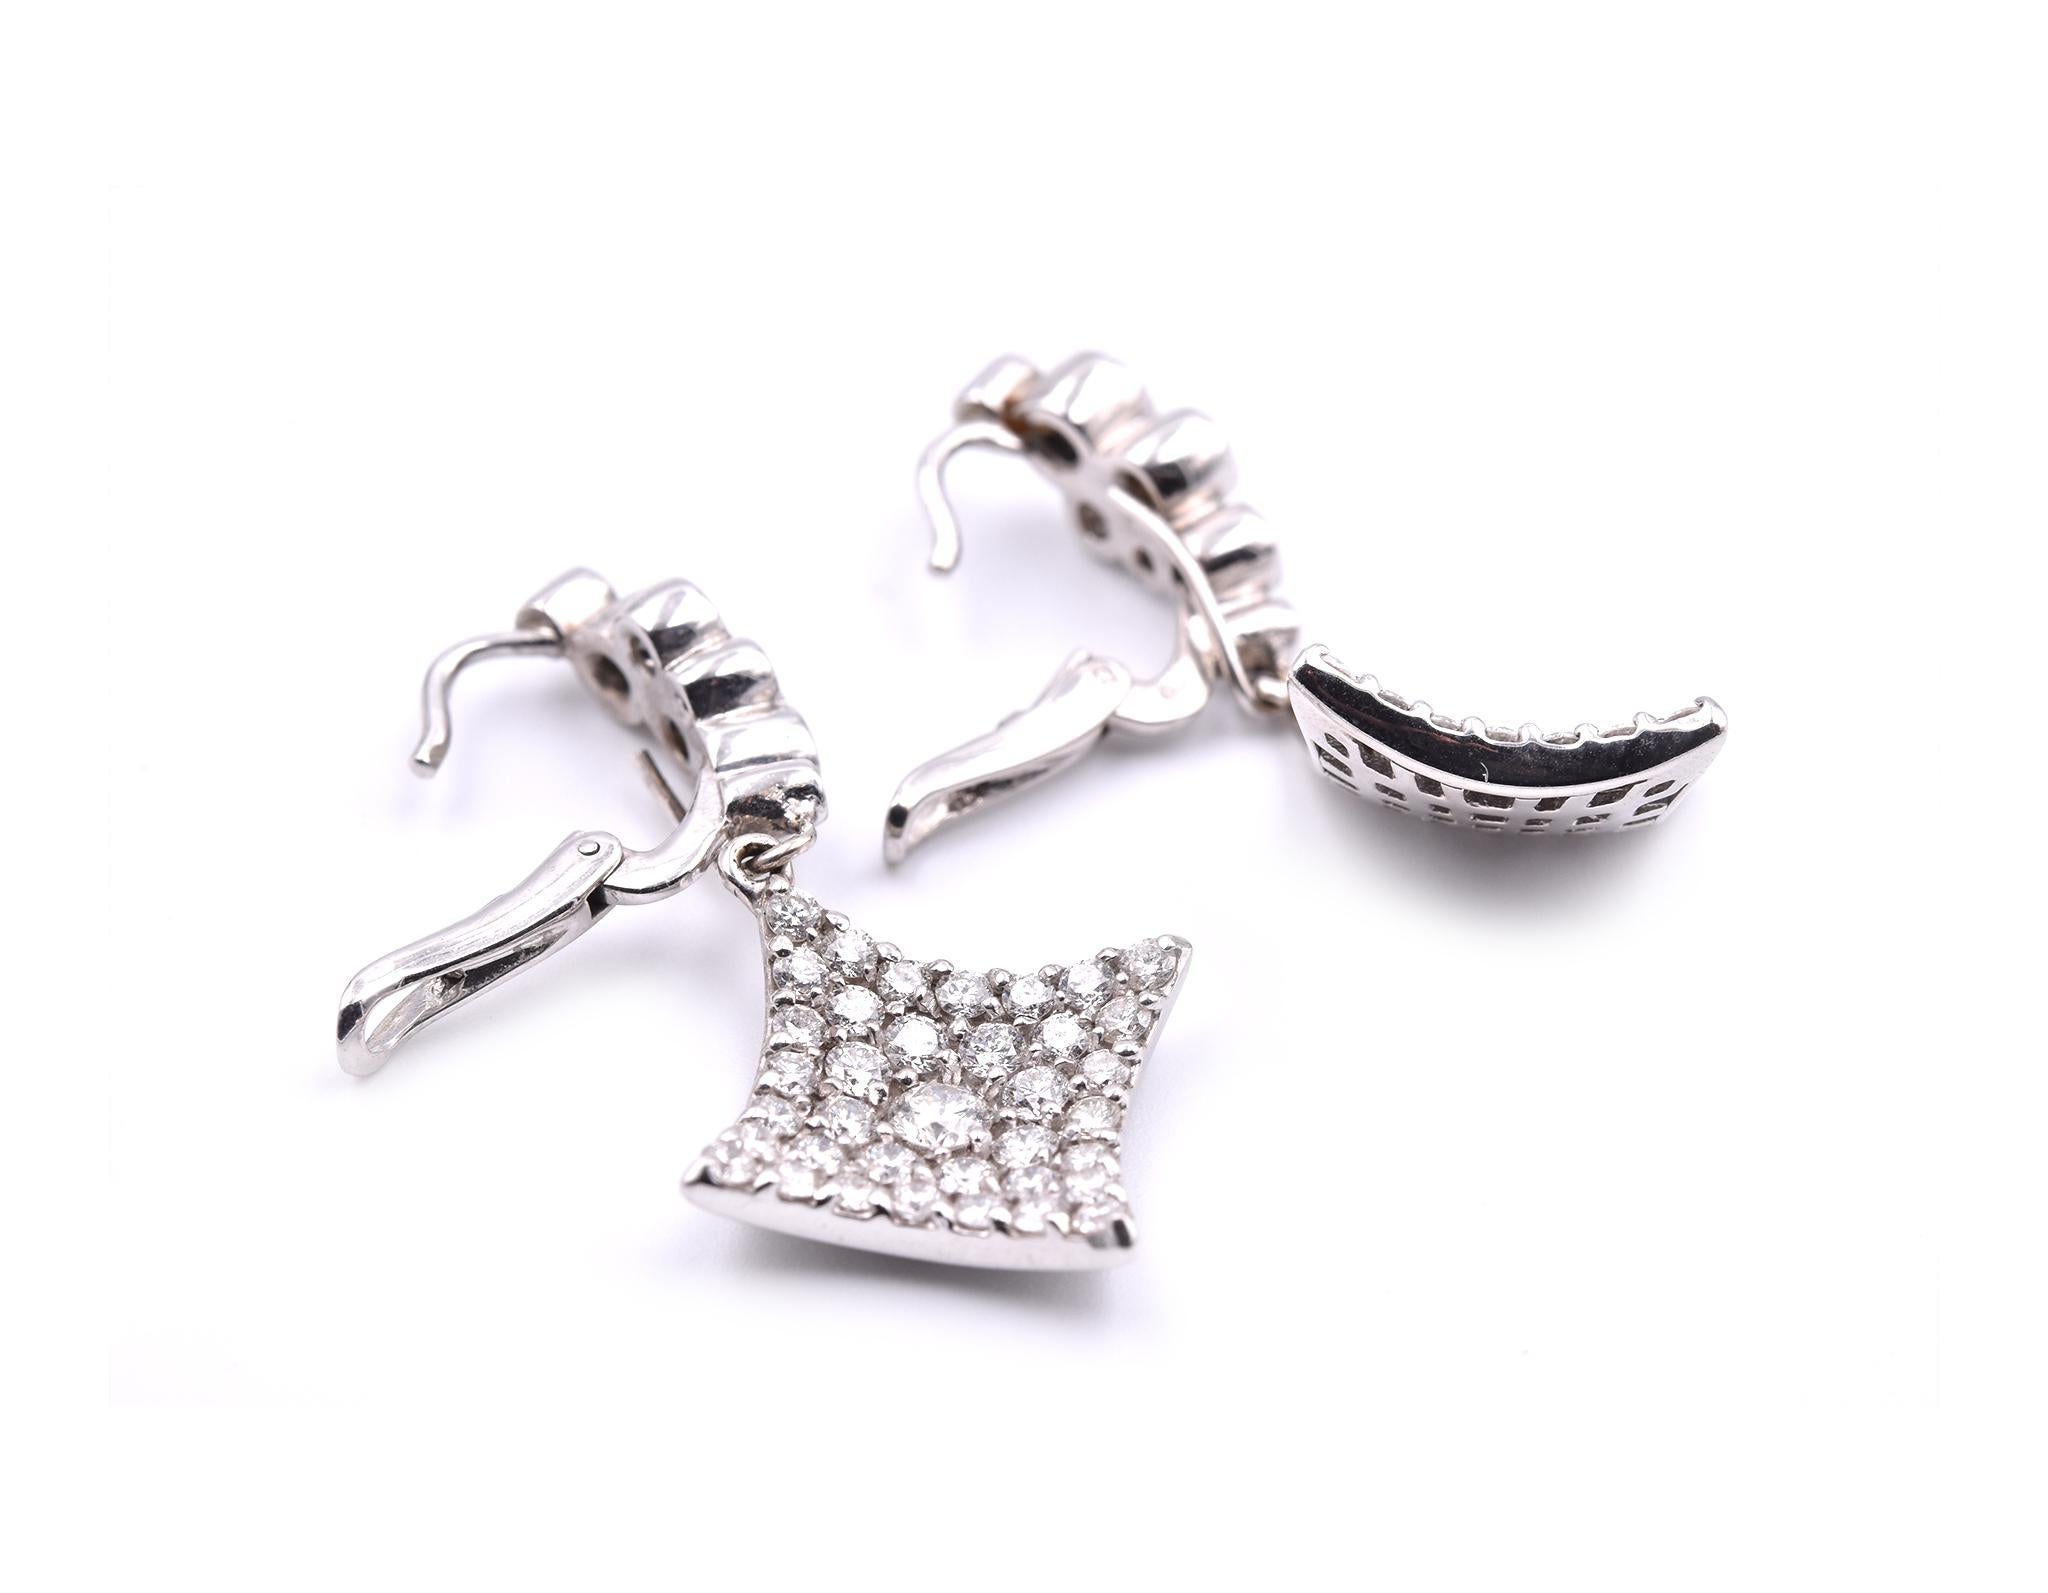 18 Karat White Gold Diamond Kite Drop Earrings In Excellent Condition For Sale In Scottsdale, AZ